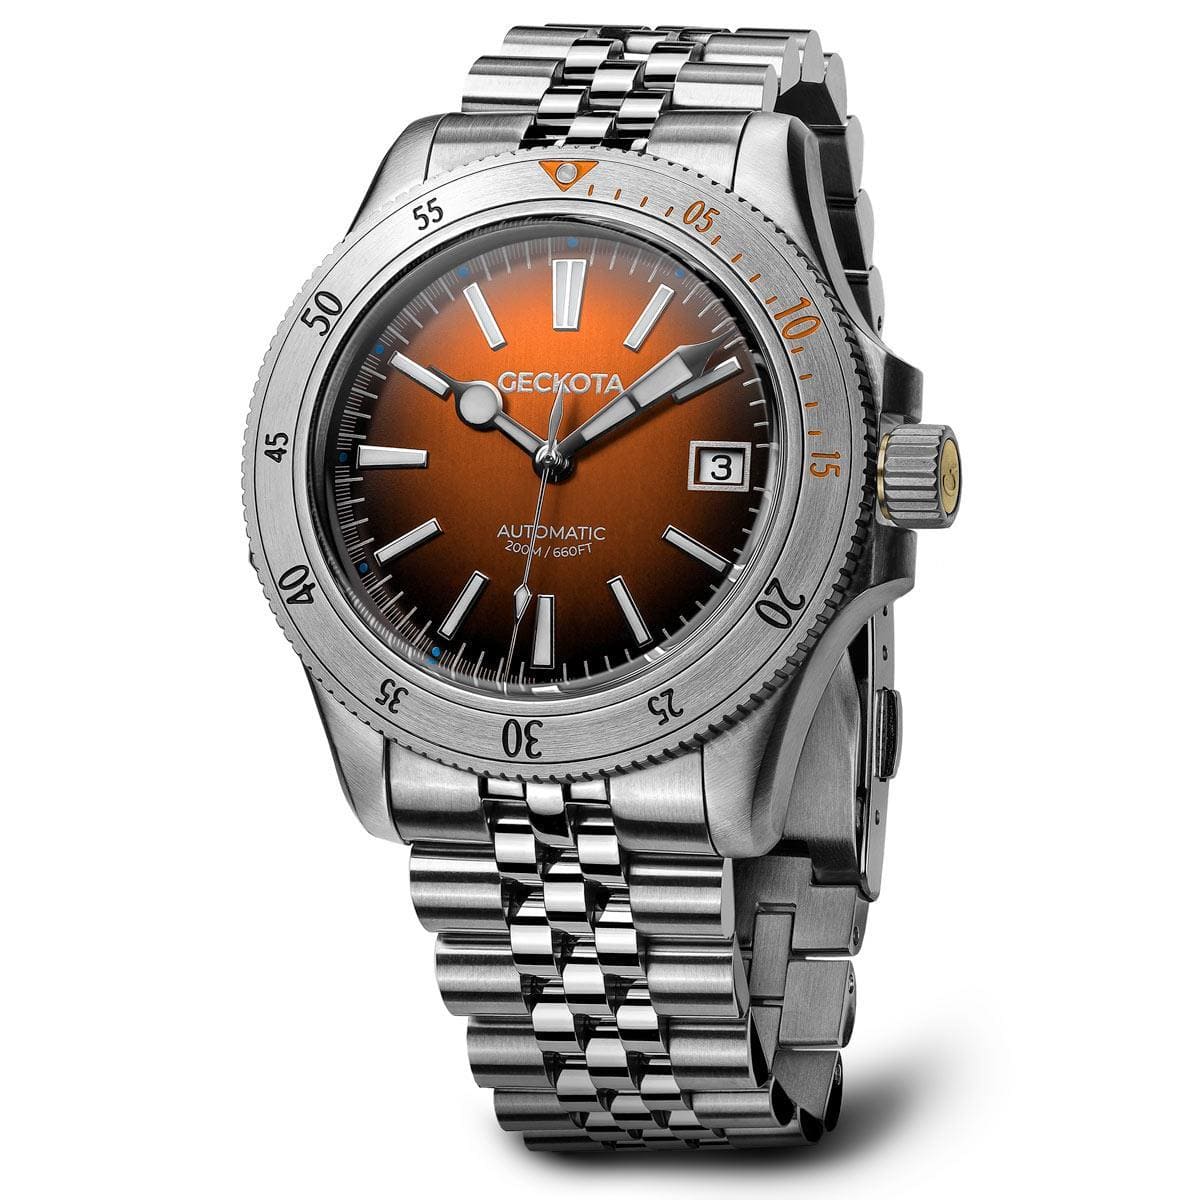 Geckota Sea Hunter Automatic Diver's Watch Steel Edition - Orange Dial - NEARLY NEW